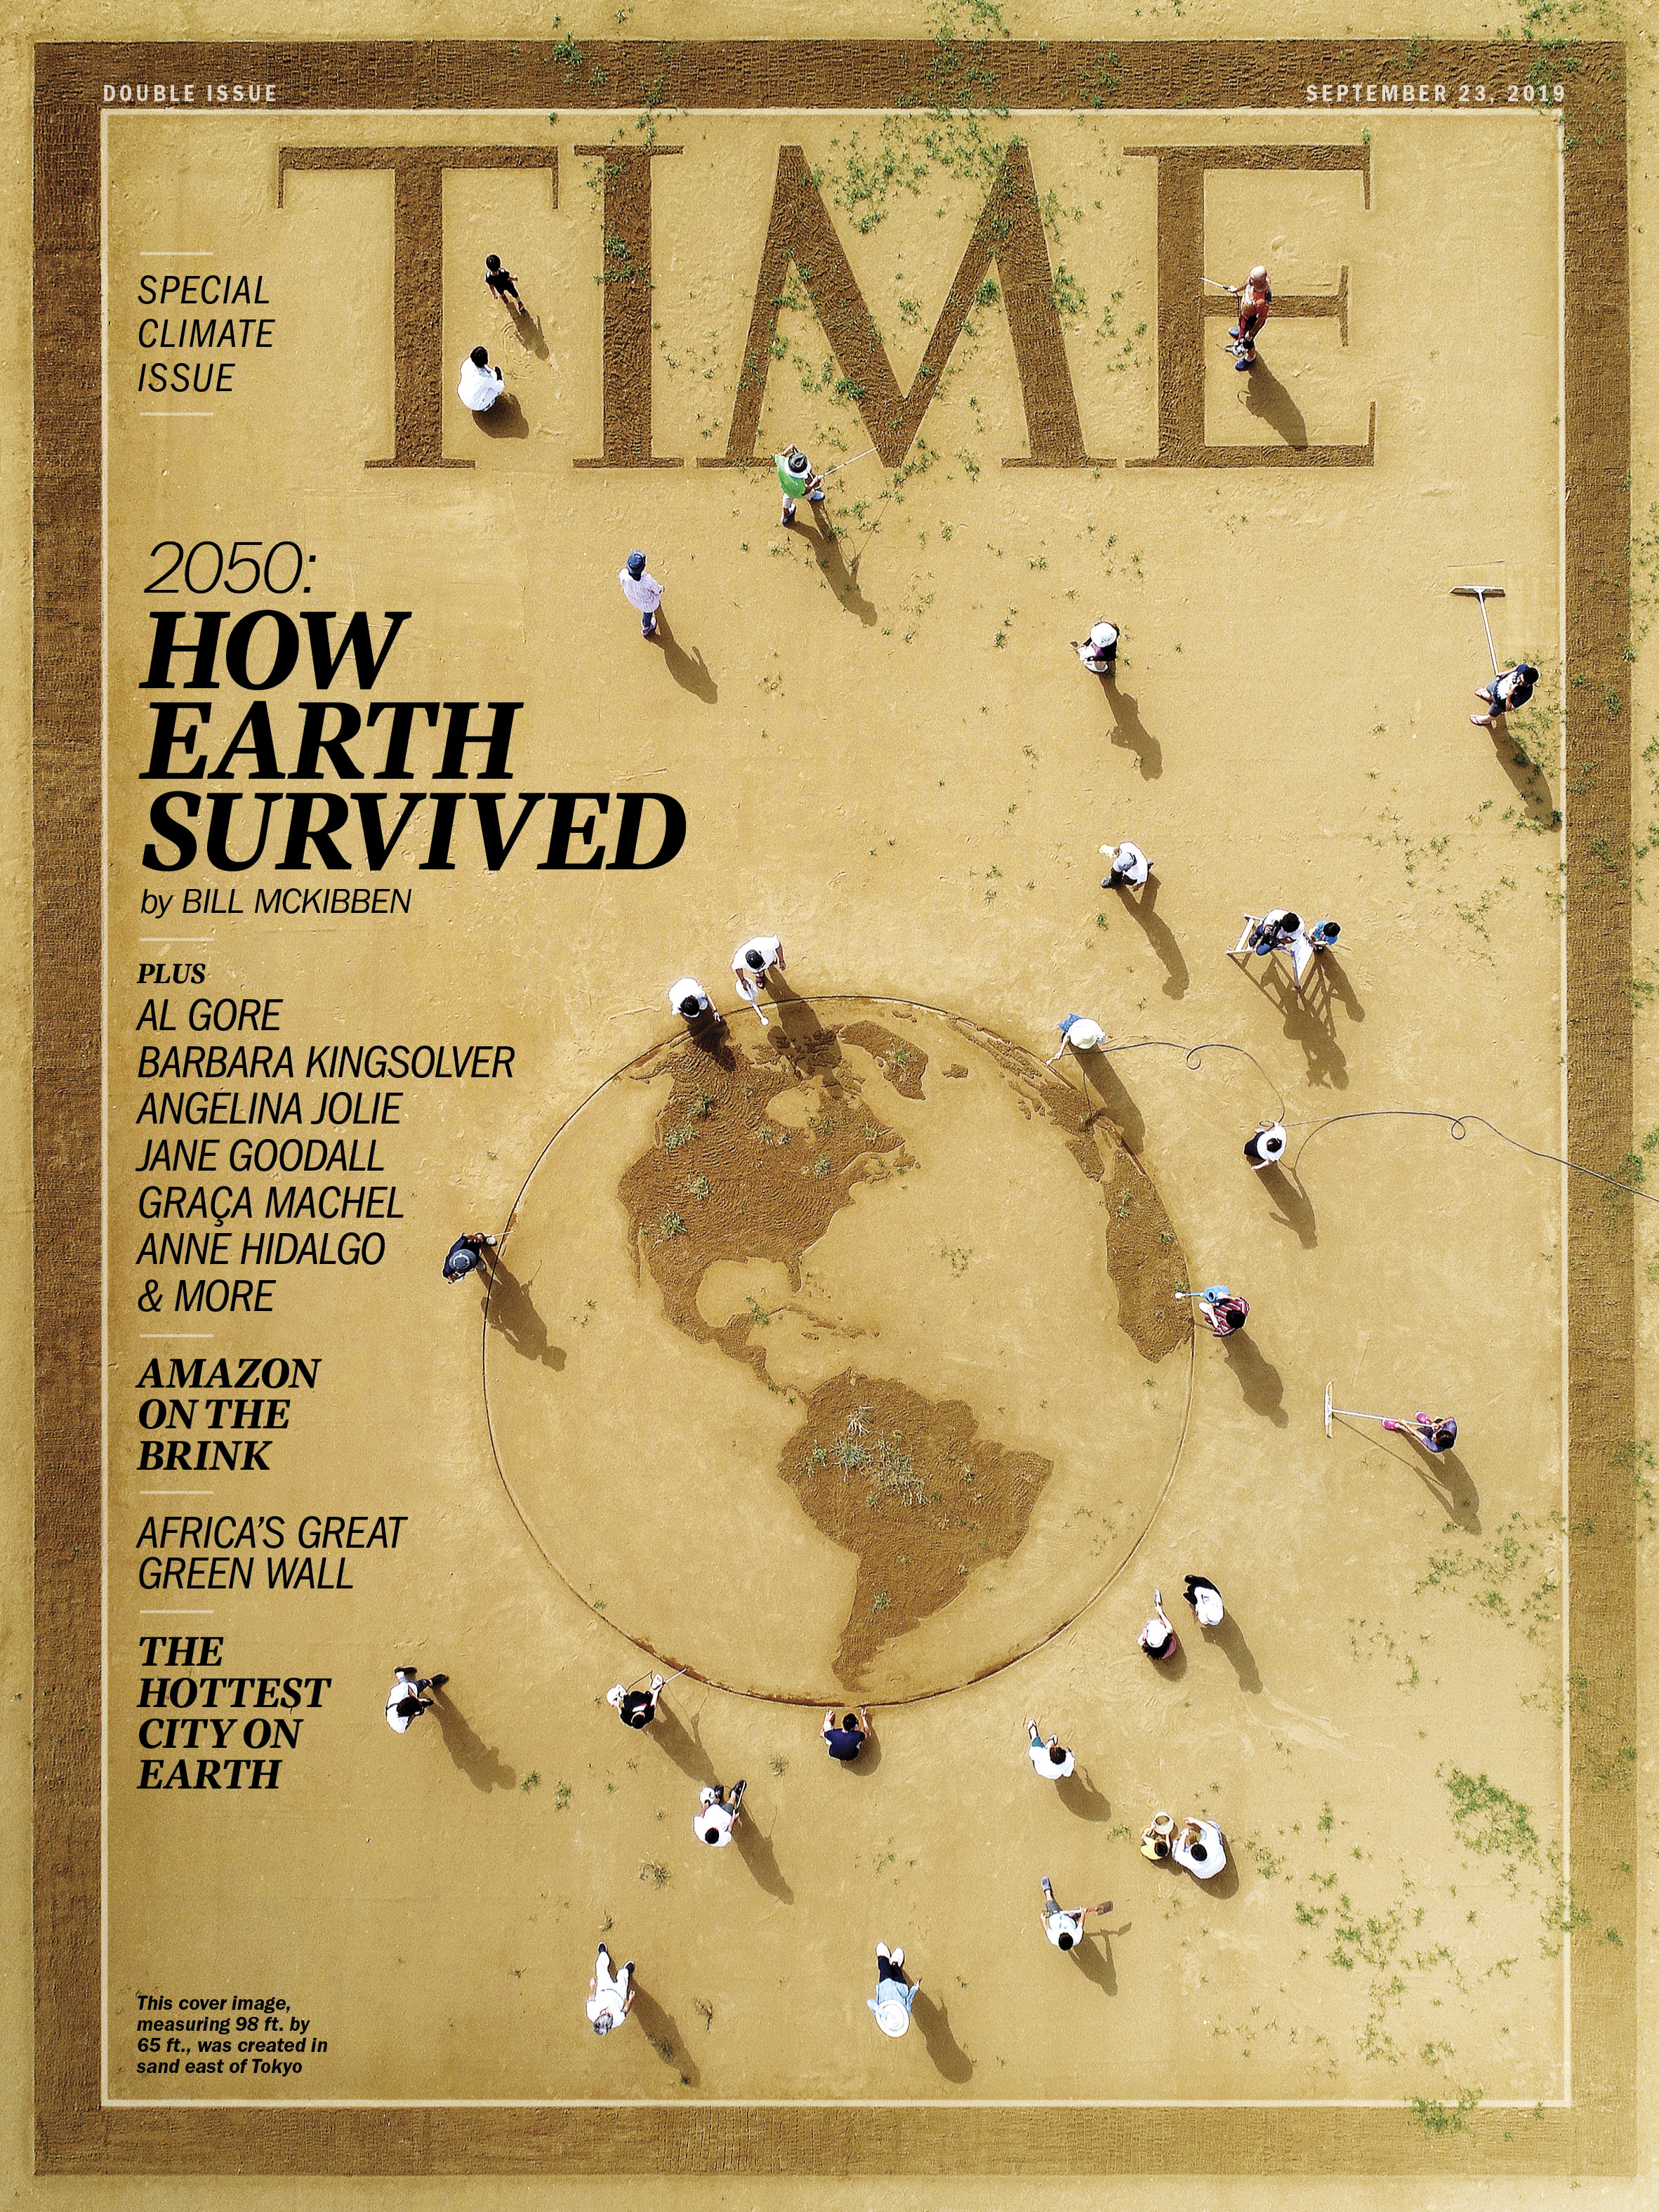 How Earth Survived Time Magazine cover